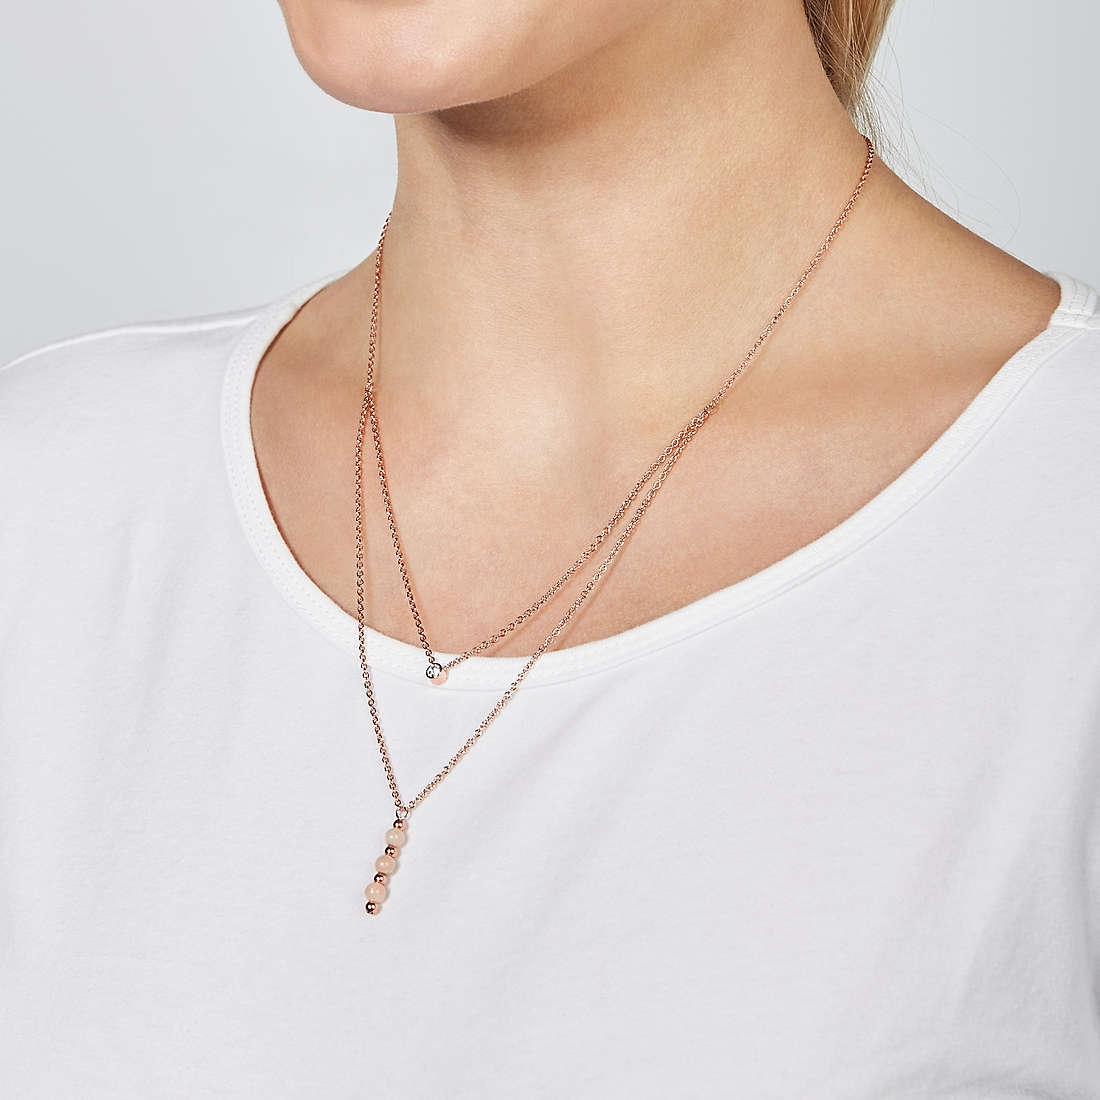 Fossil necklaces Classics woman JF03529791 wearing